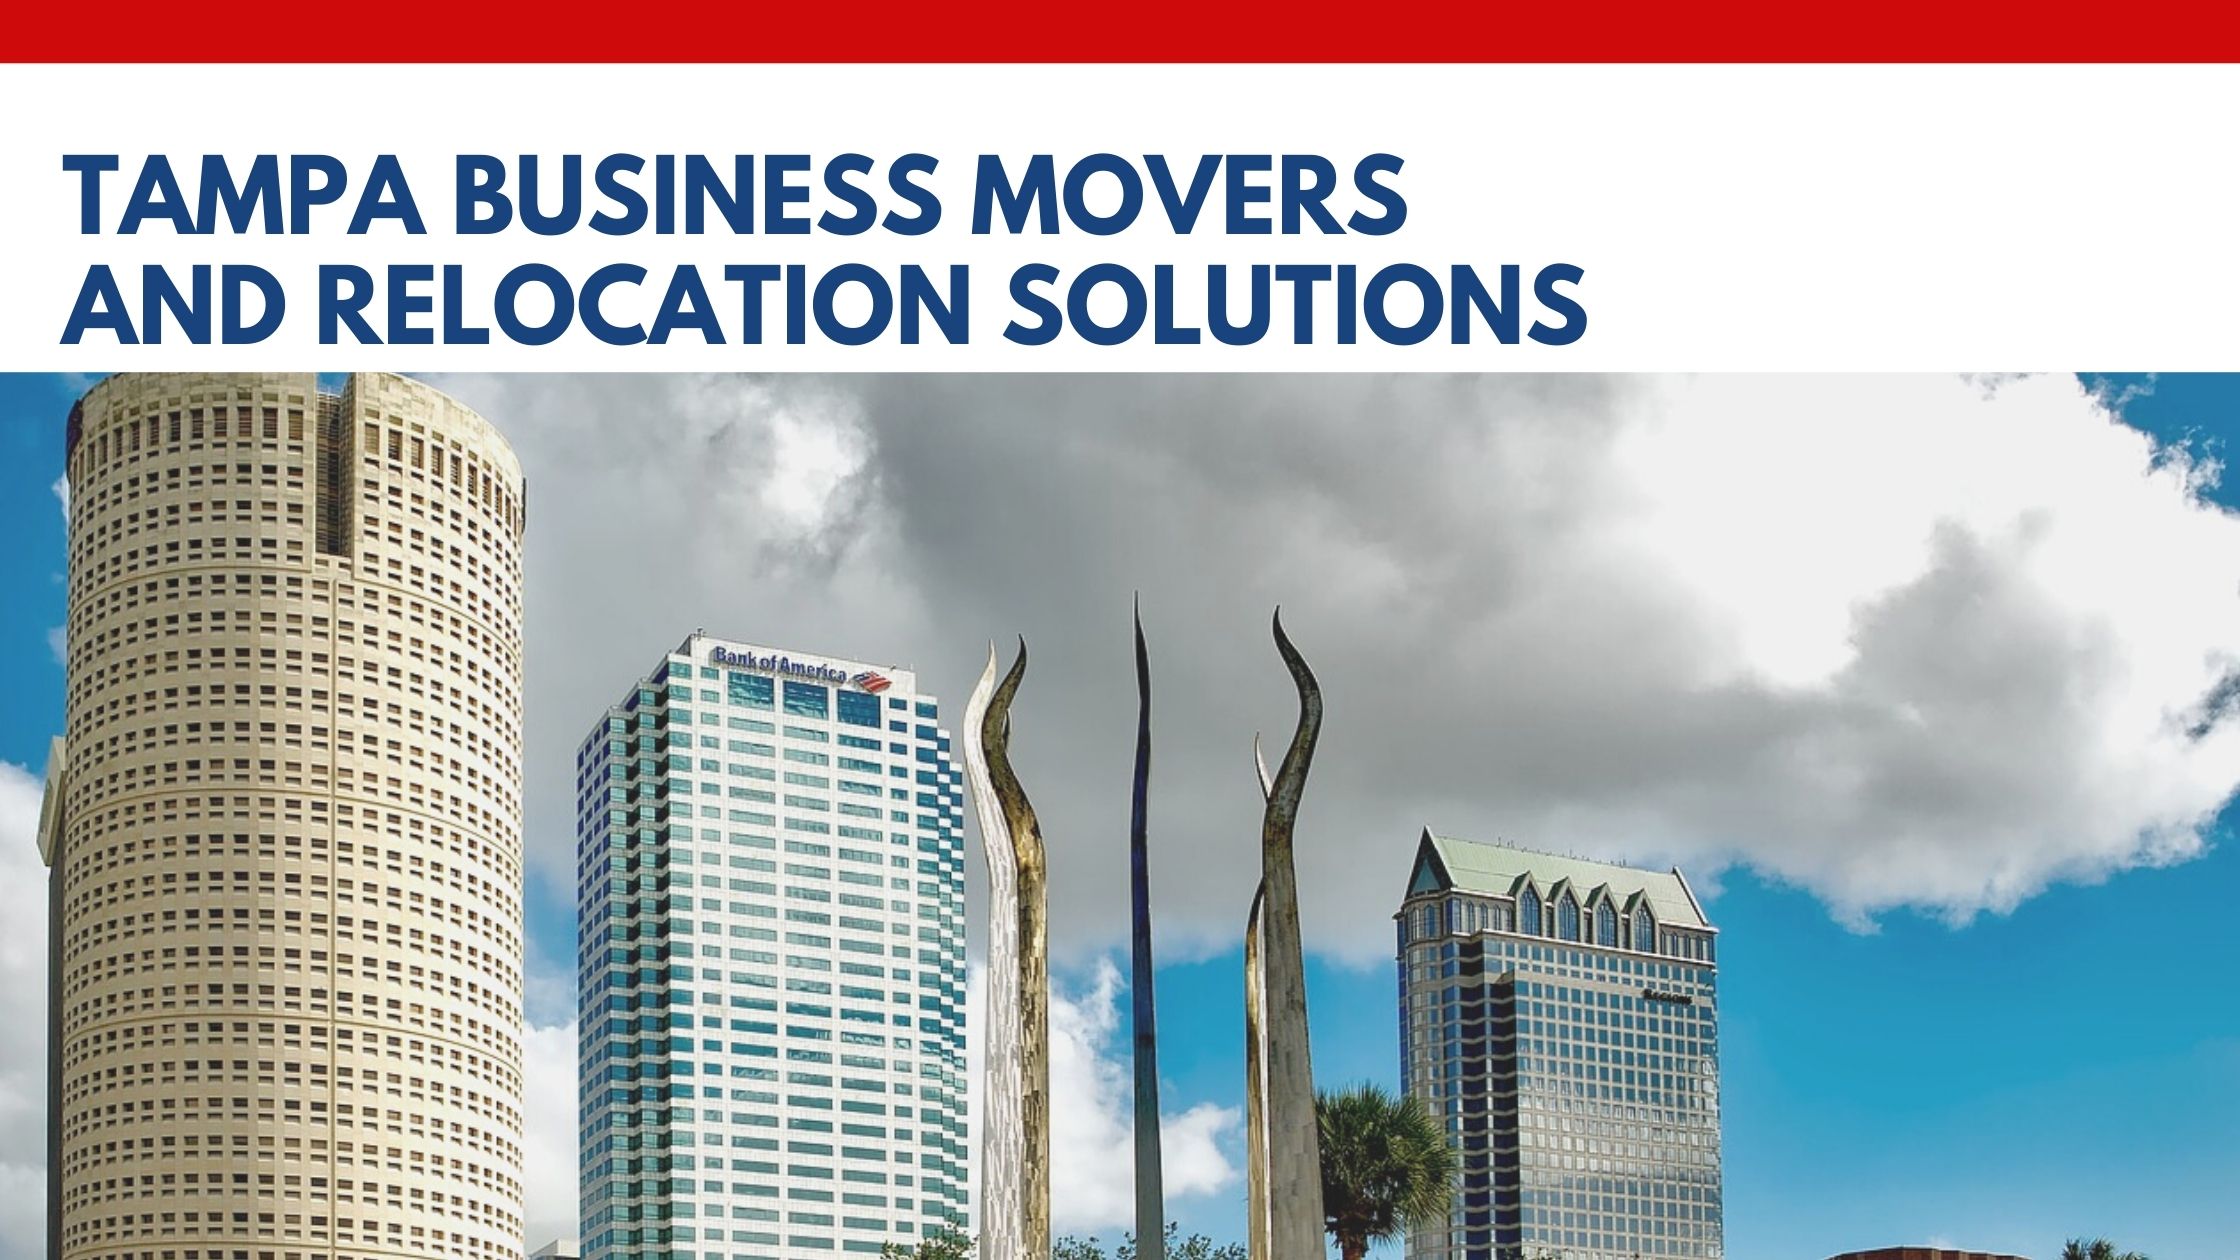 Tampa Business Movers and Relocation Solutions